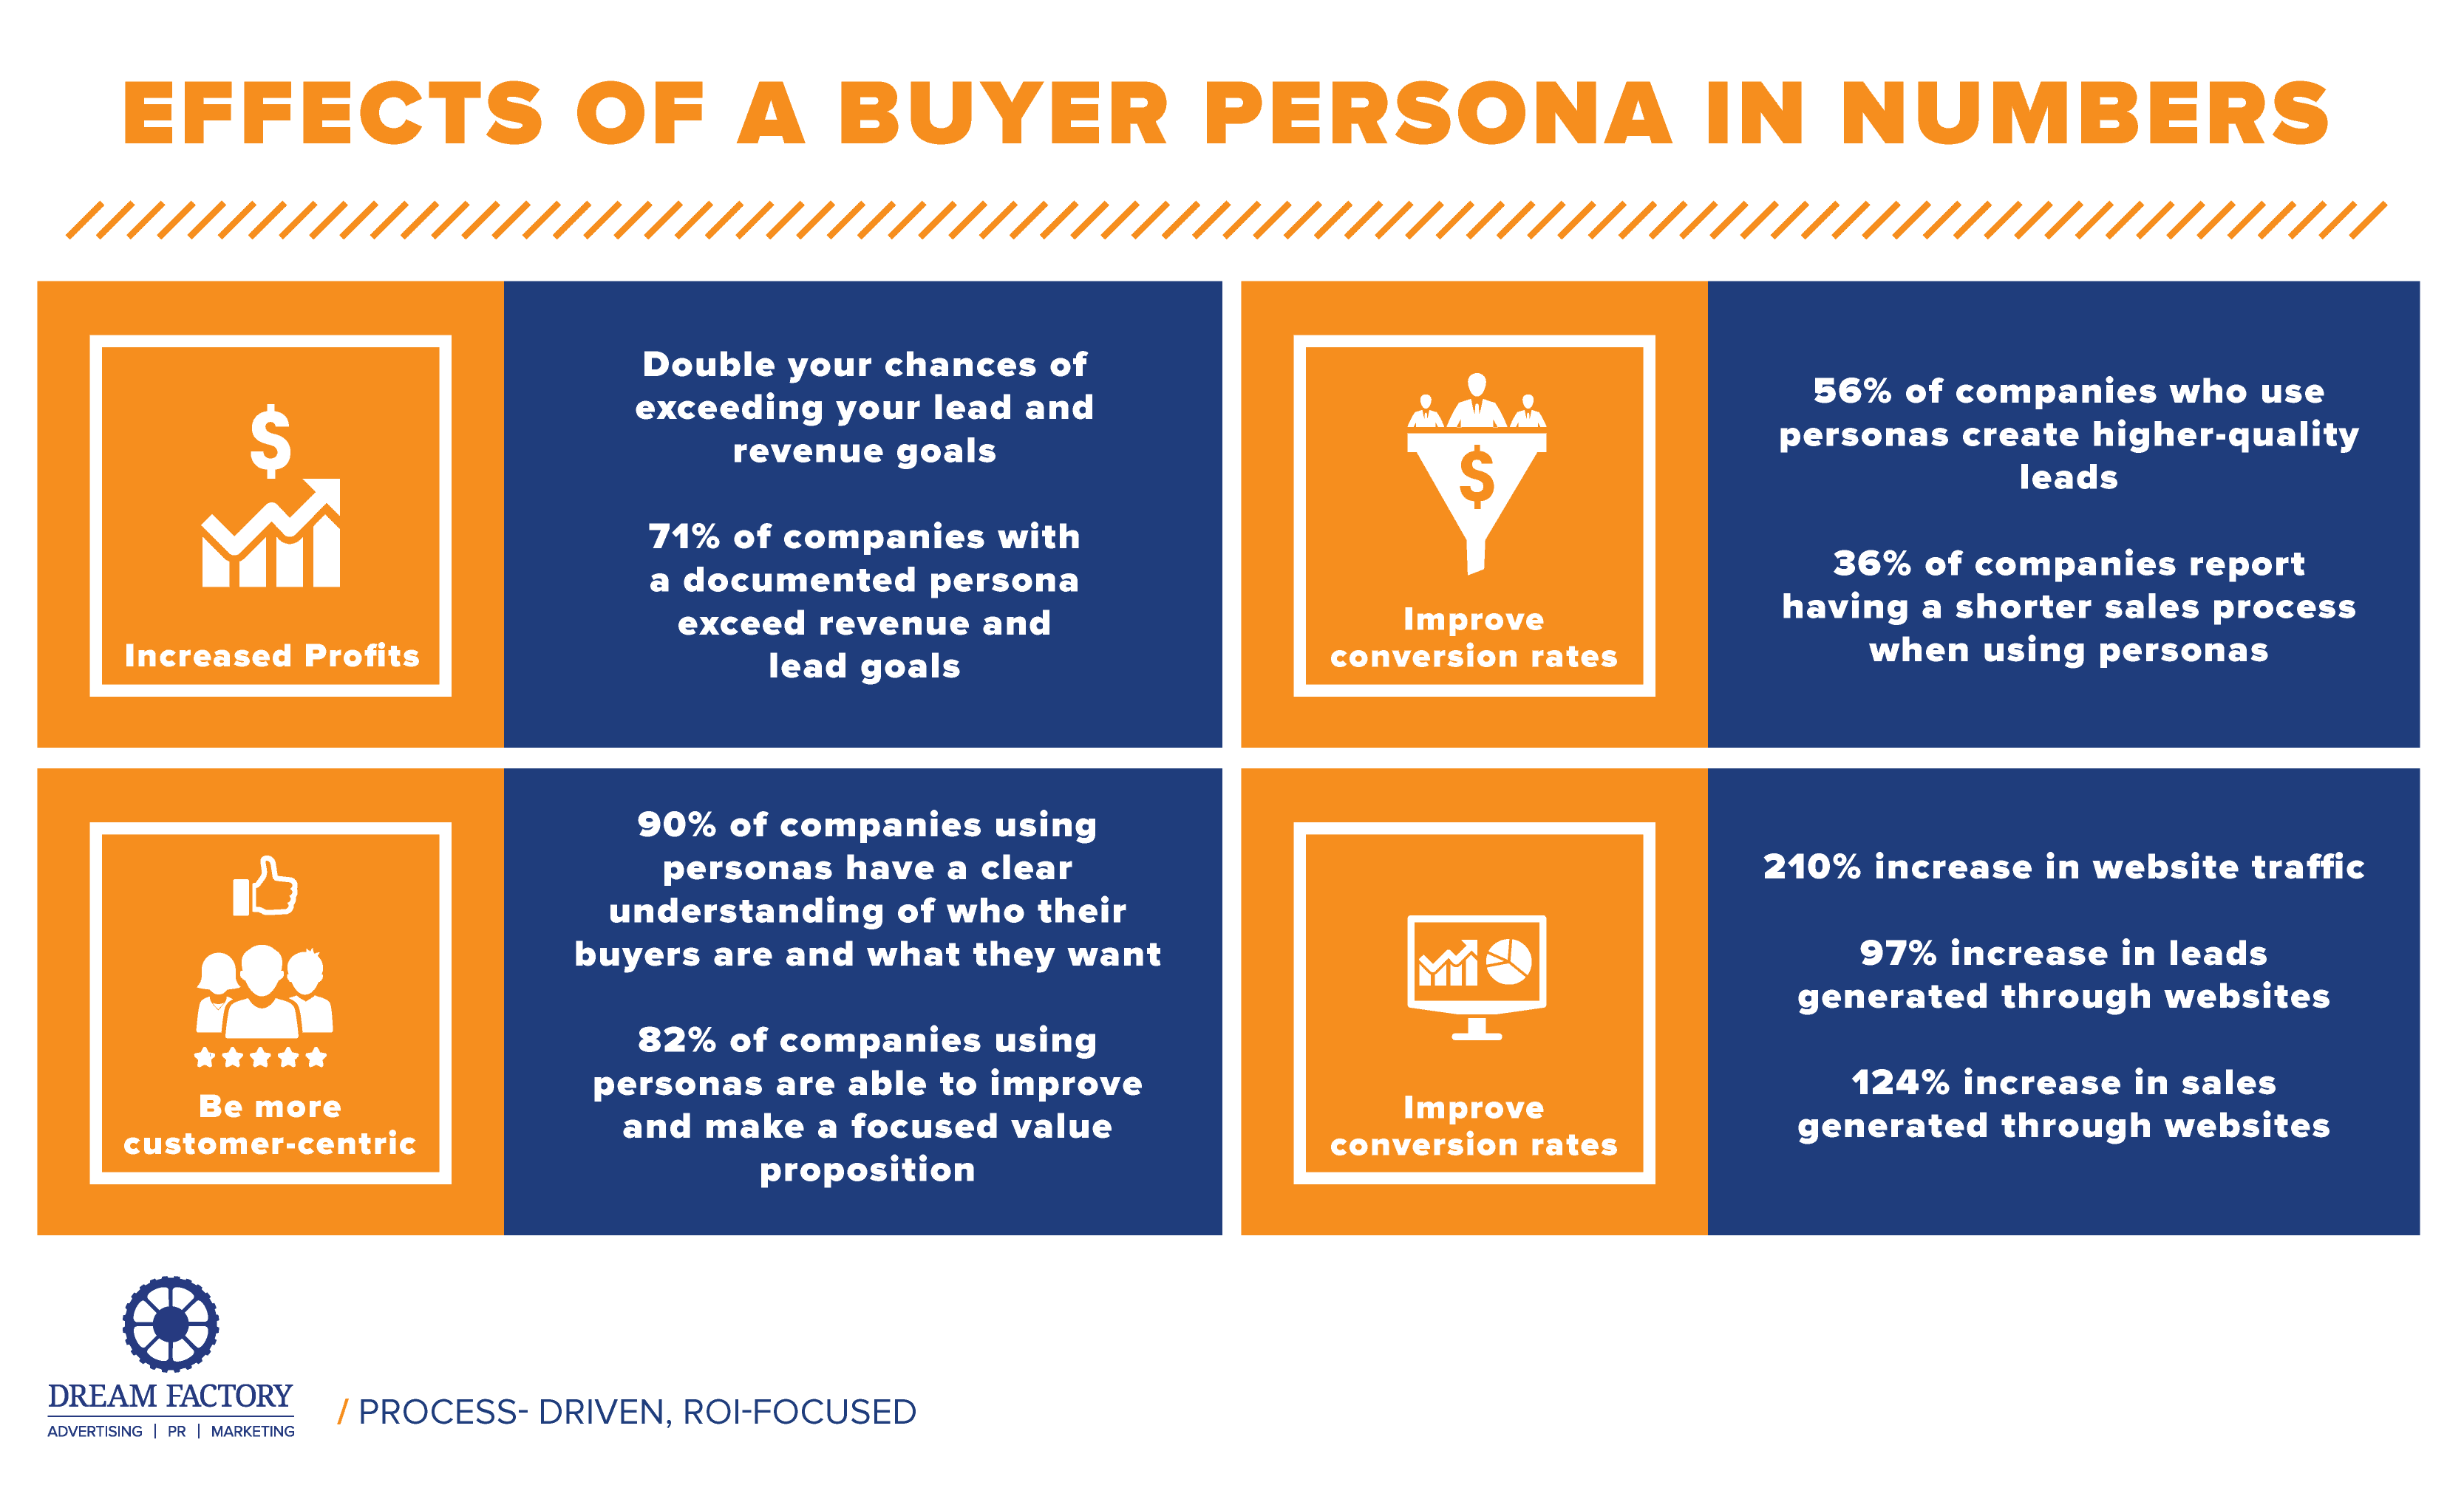 Infographic showing the effects of a buyer persona